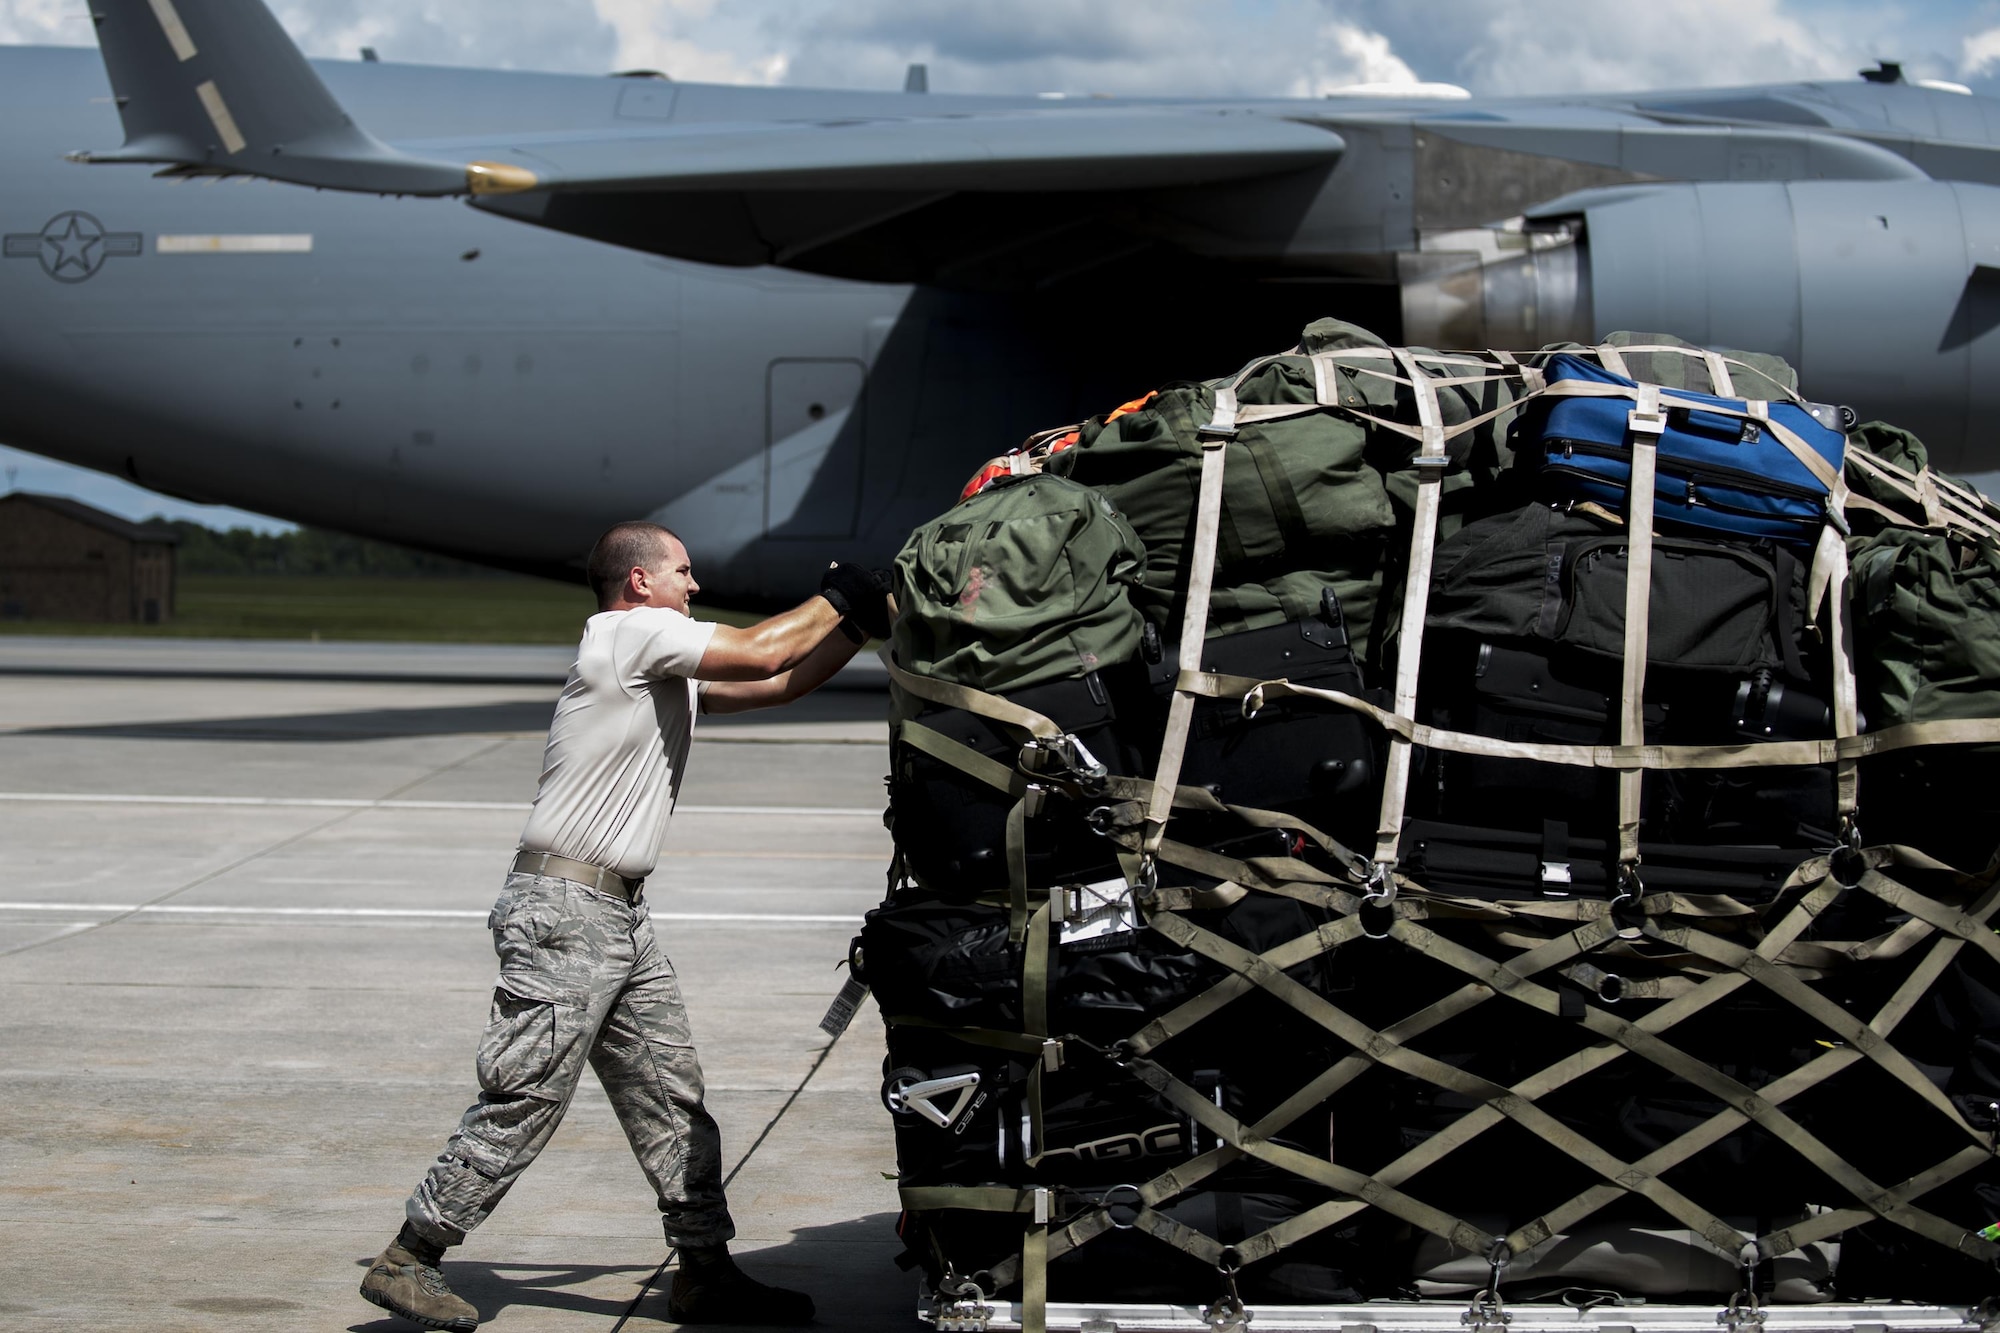 U.S. Air Force Staff Sgt. Brennon Scott, 23d Logistics Readiness Squadron air terminal operations supervisor, secures luggage and weapons on a pallet for a deployment, Sept. 26, 2016, at Moody Air Force Base, Ga. The pallet was loaded onto a C-17 Globemaster III for transport. (U.S. Air Force photo by Airman 1st Class Daniel Snider)